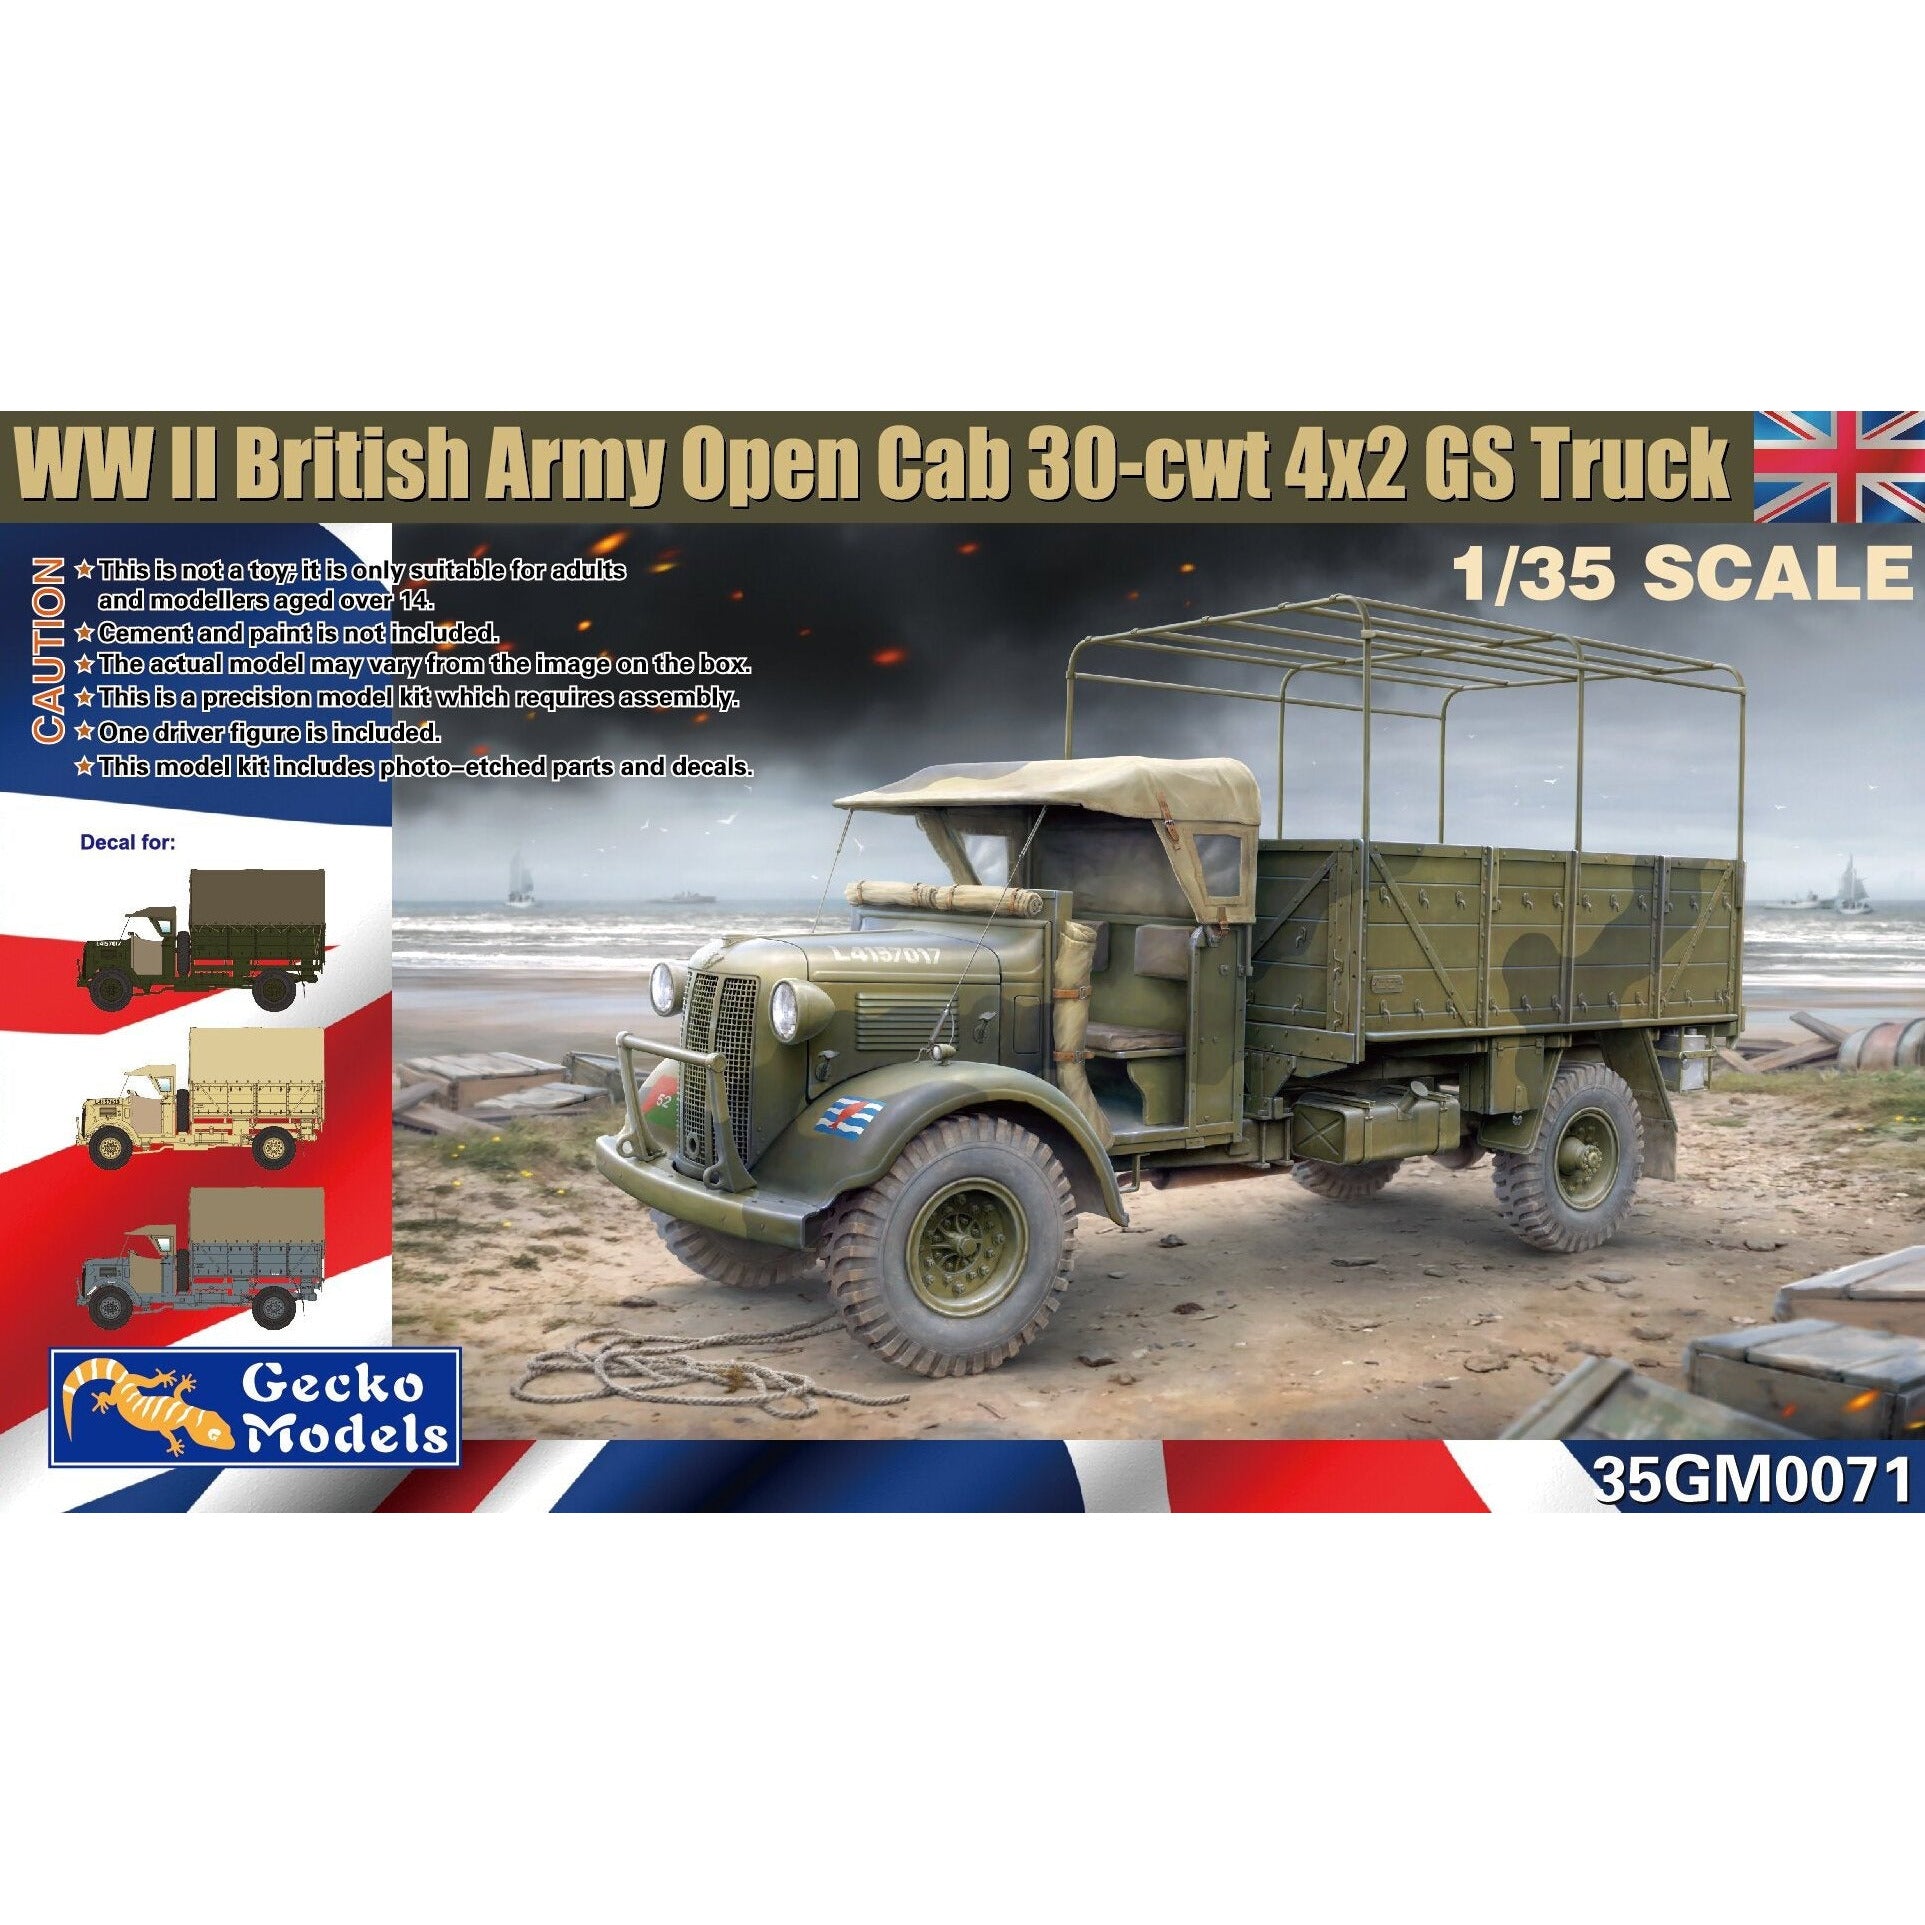 WWII British Army Open Cab 30-cwt 4x2 GS Truck 1/35 #35GM0071 by Gecko Models